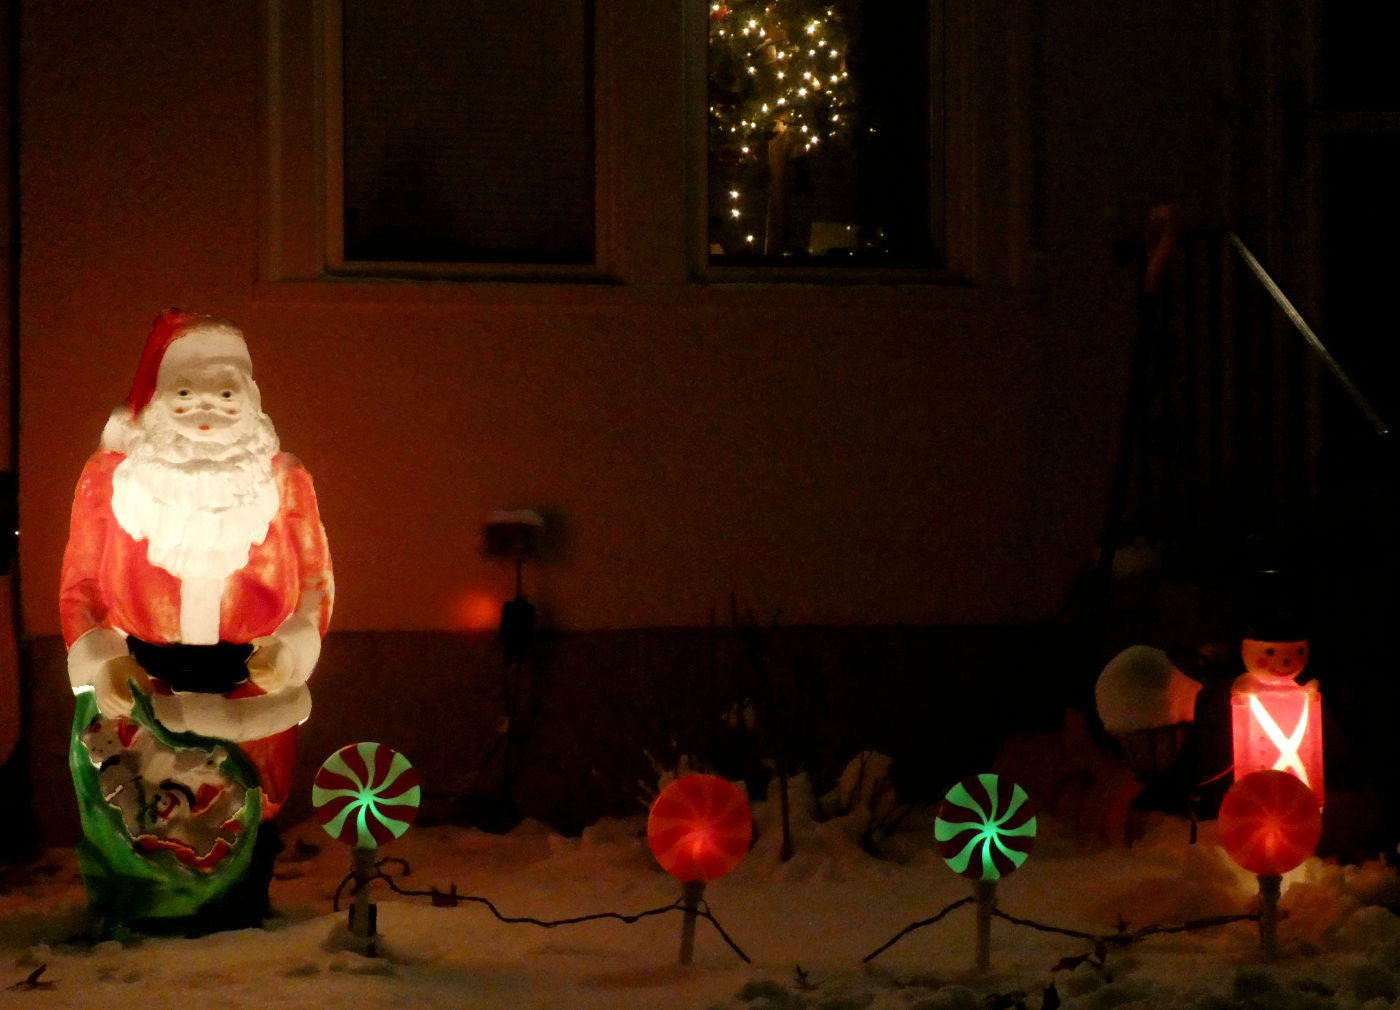 Lit-up santa yard statue with green and yellow candelsticks and a smaller nutcracker statue